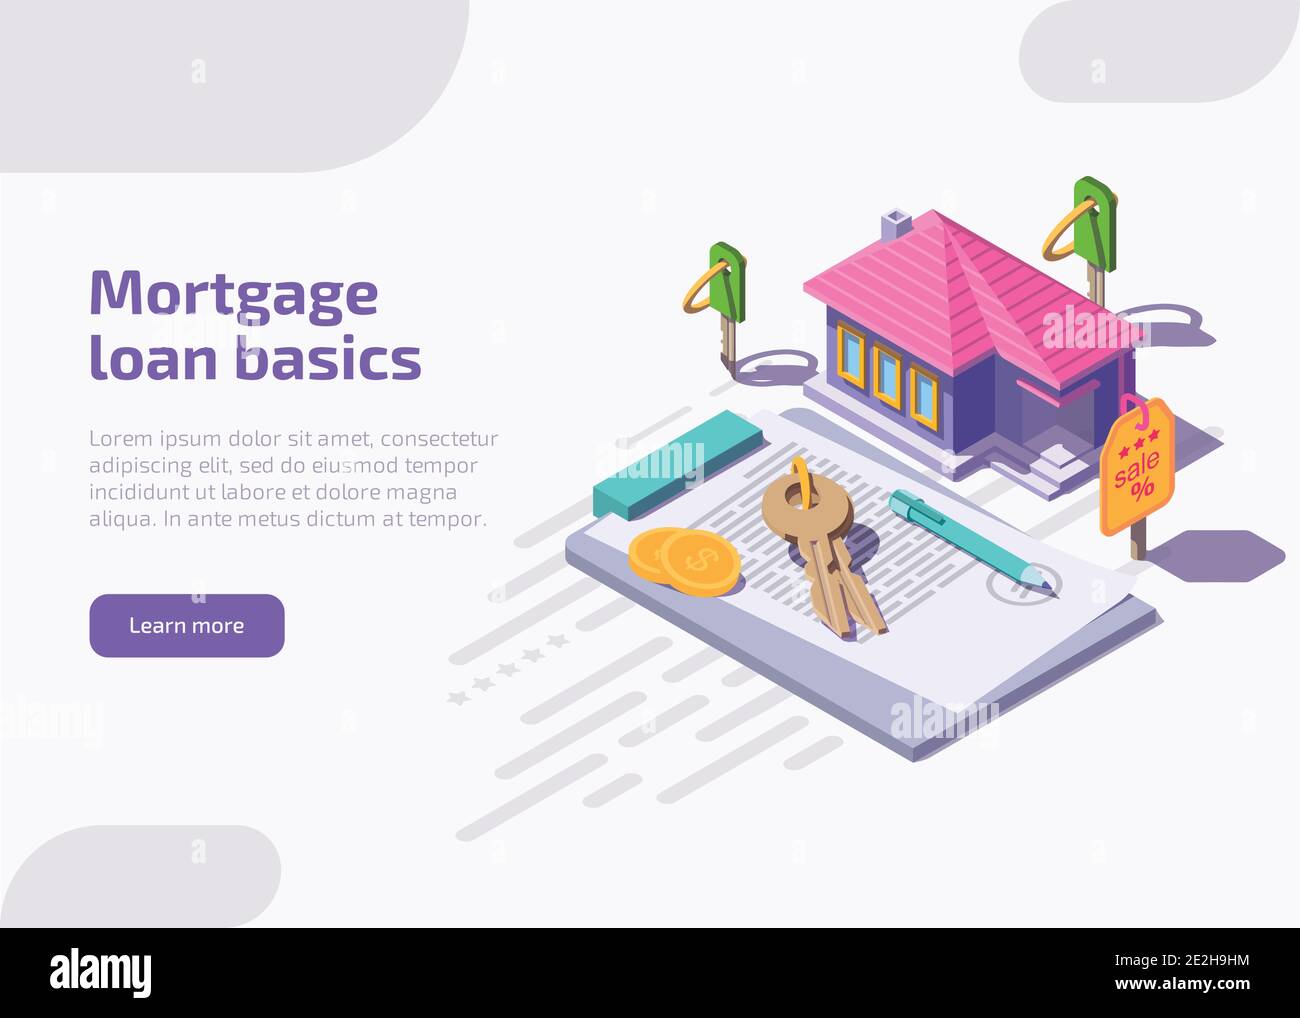 Mortgage loan basics landing page or web banner. Concept of purchase house with bank credit, invest in real estate. Property mortgage with isometric home, money, keys, financial contract or agreement. Stock Vector